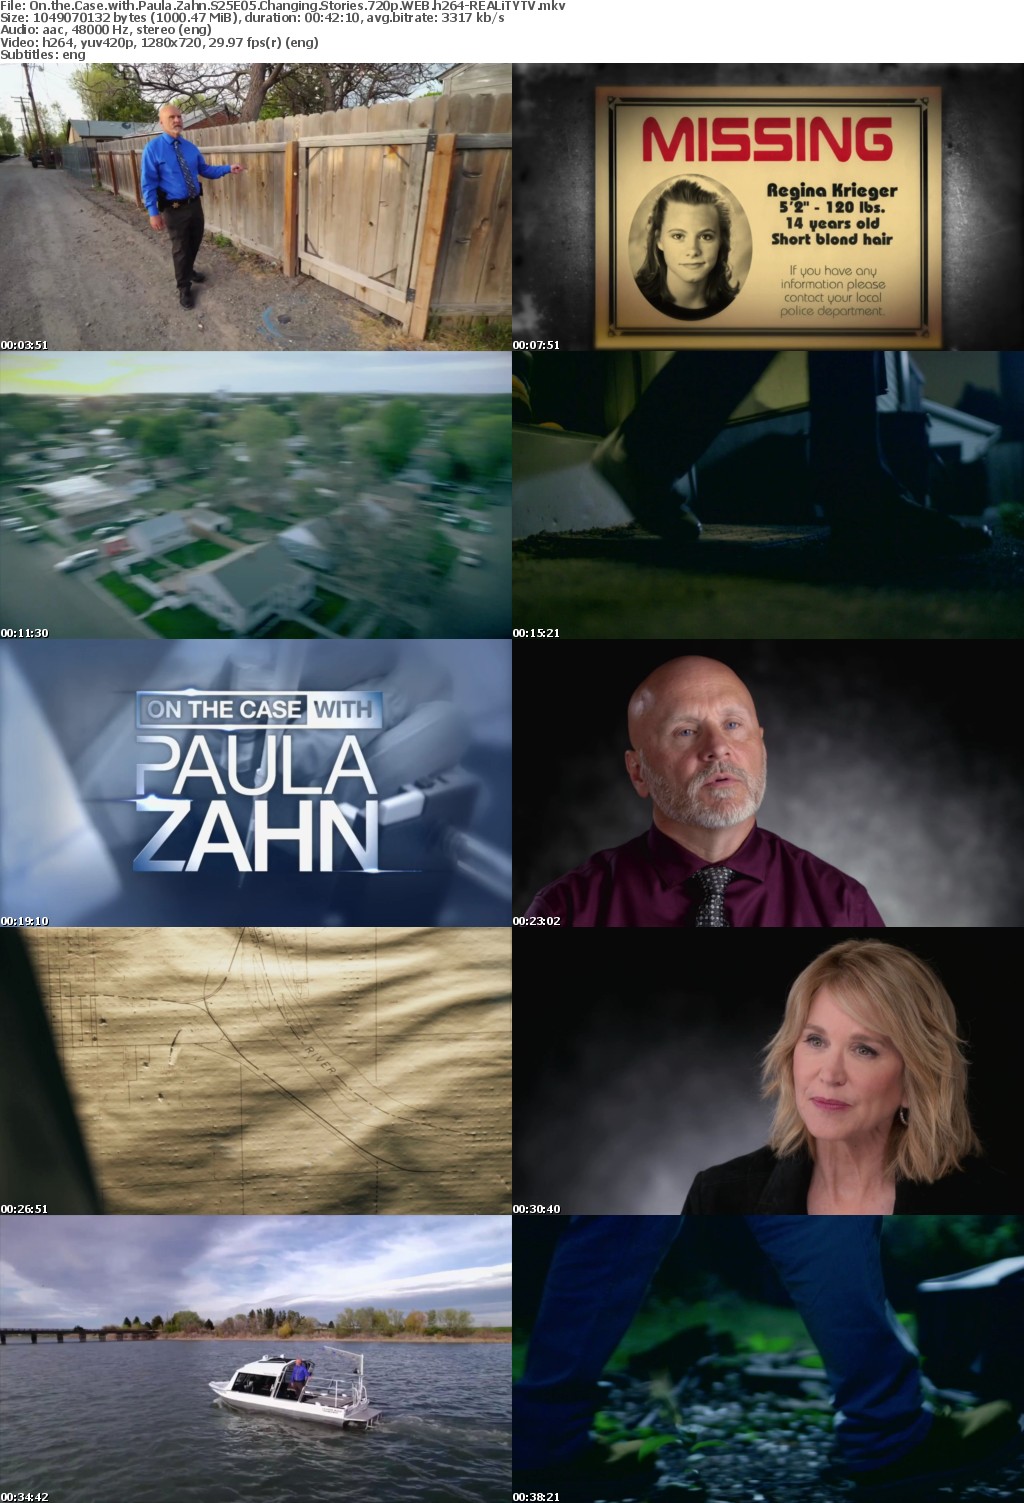 On the Case with Paula Zahn S25E05 Changing Stories 720p WEB h264-REALiTYTV